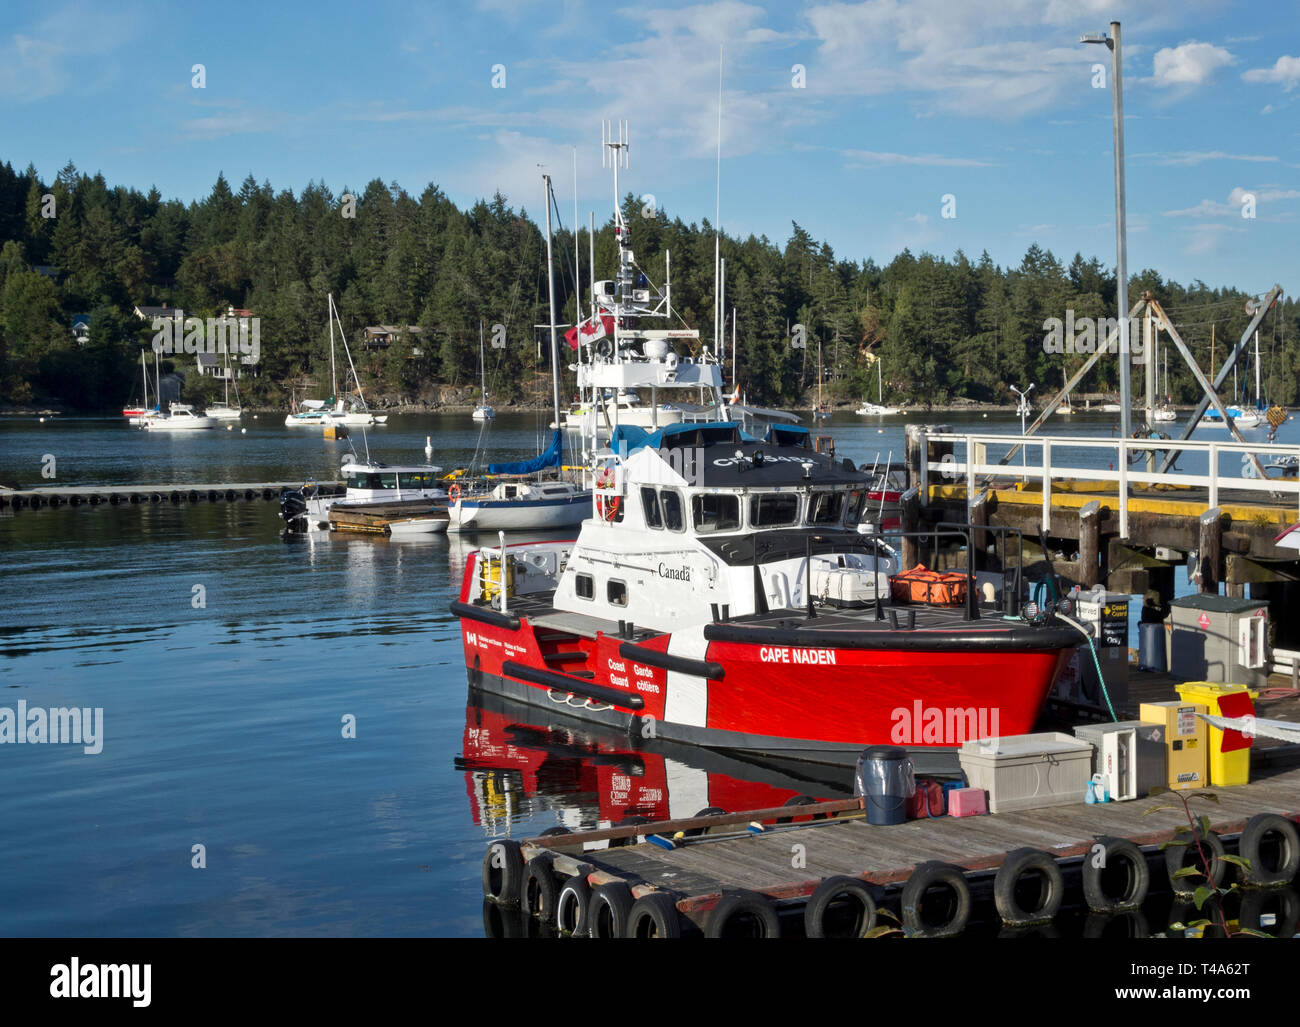 Canadian Coast Guard vessel 'Cape Naden' docked in Ganges harbour on Salt Spring Island, BC, Canada. Stock Photo